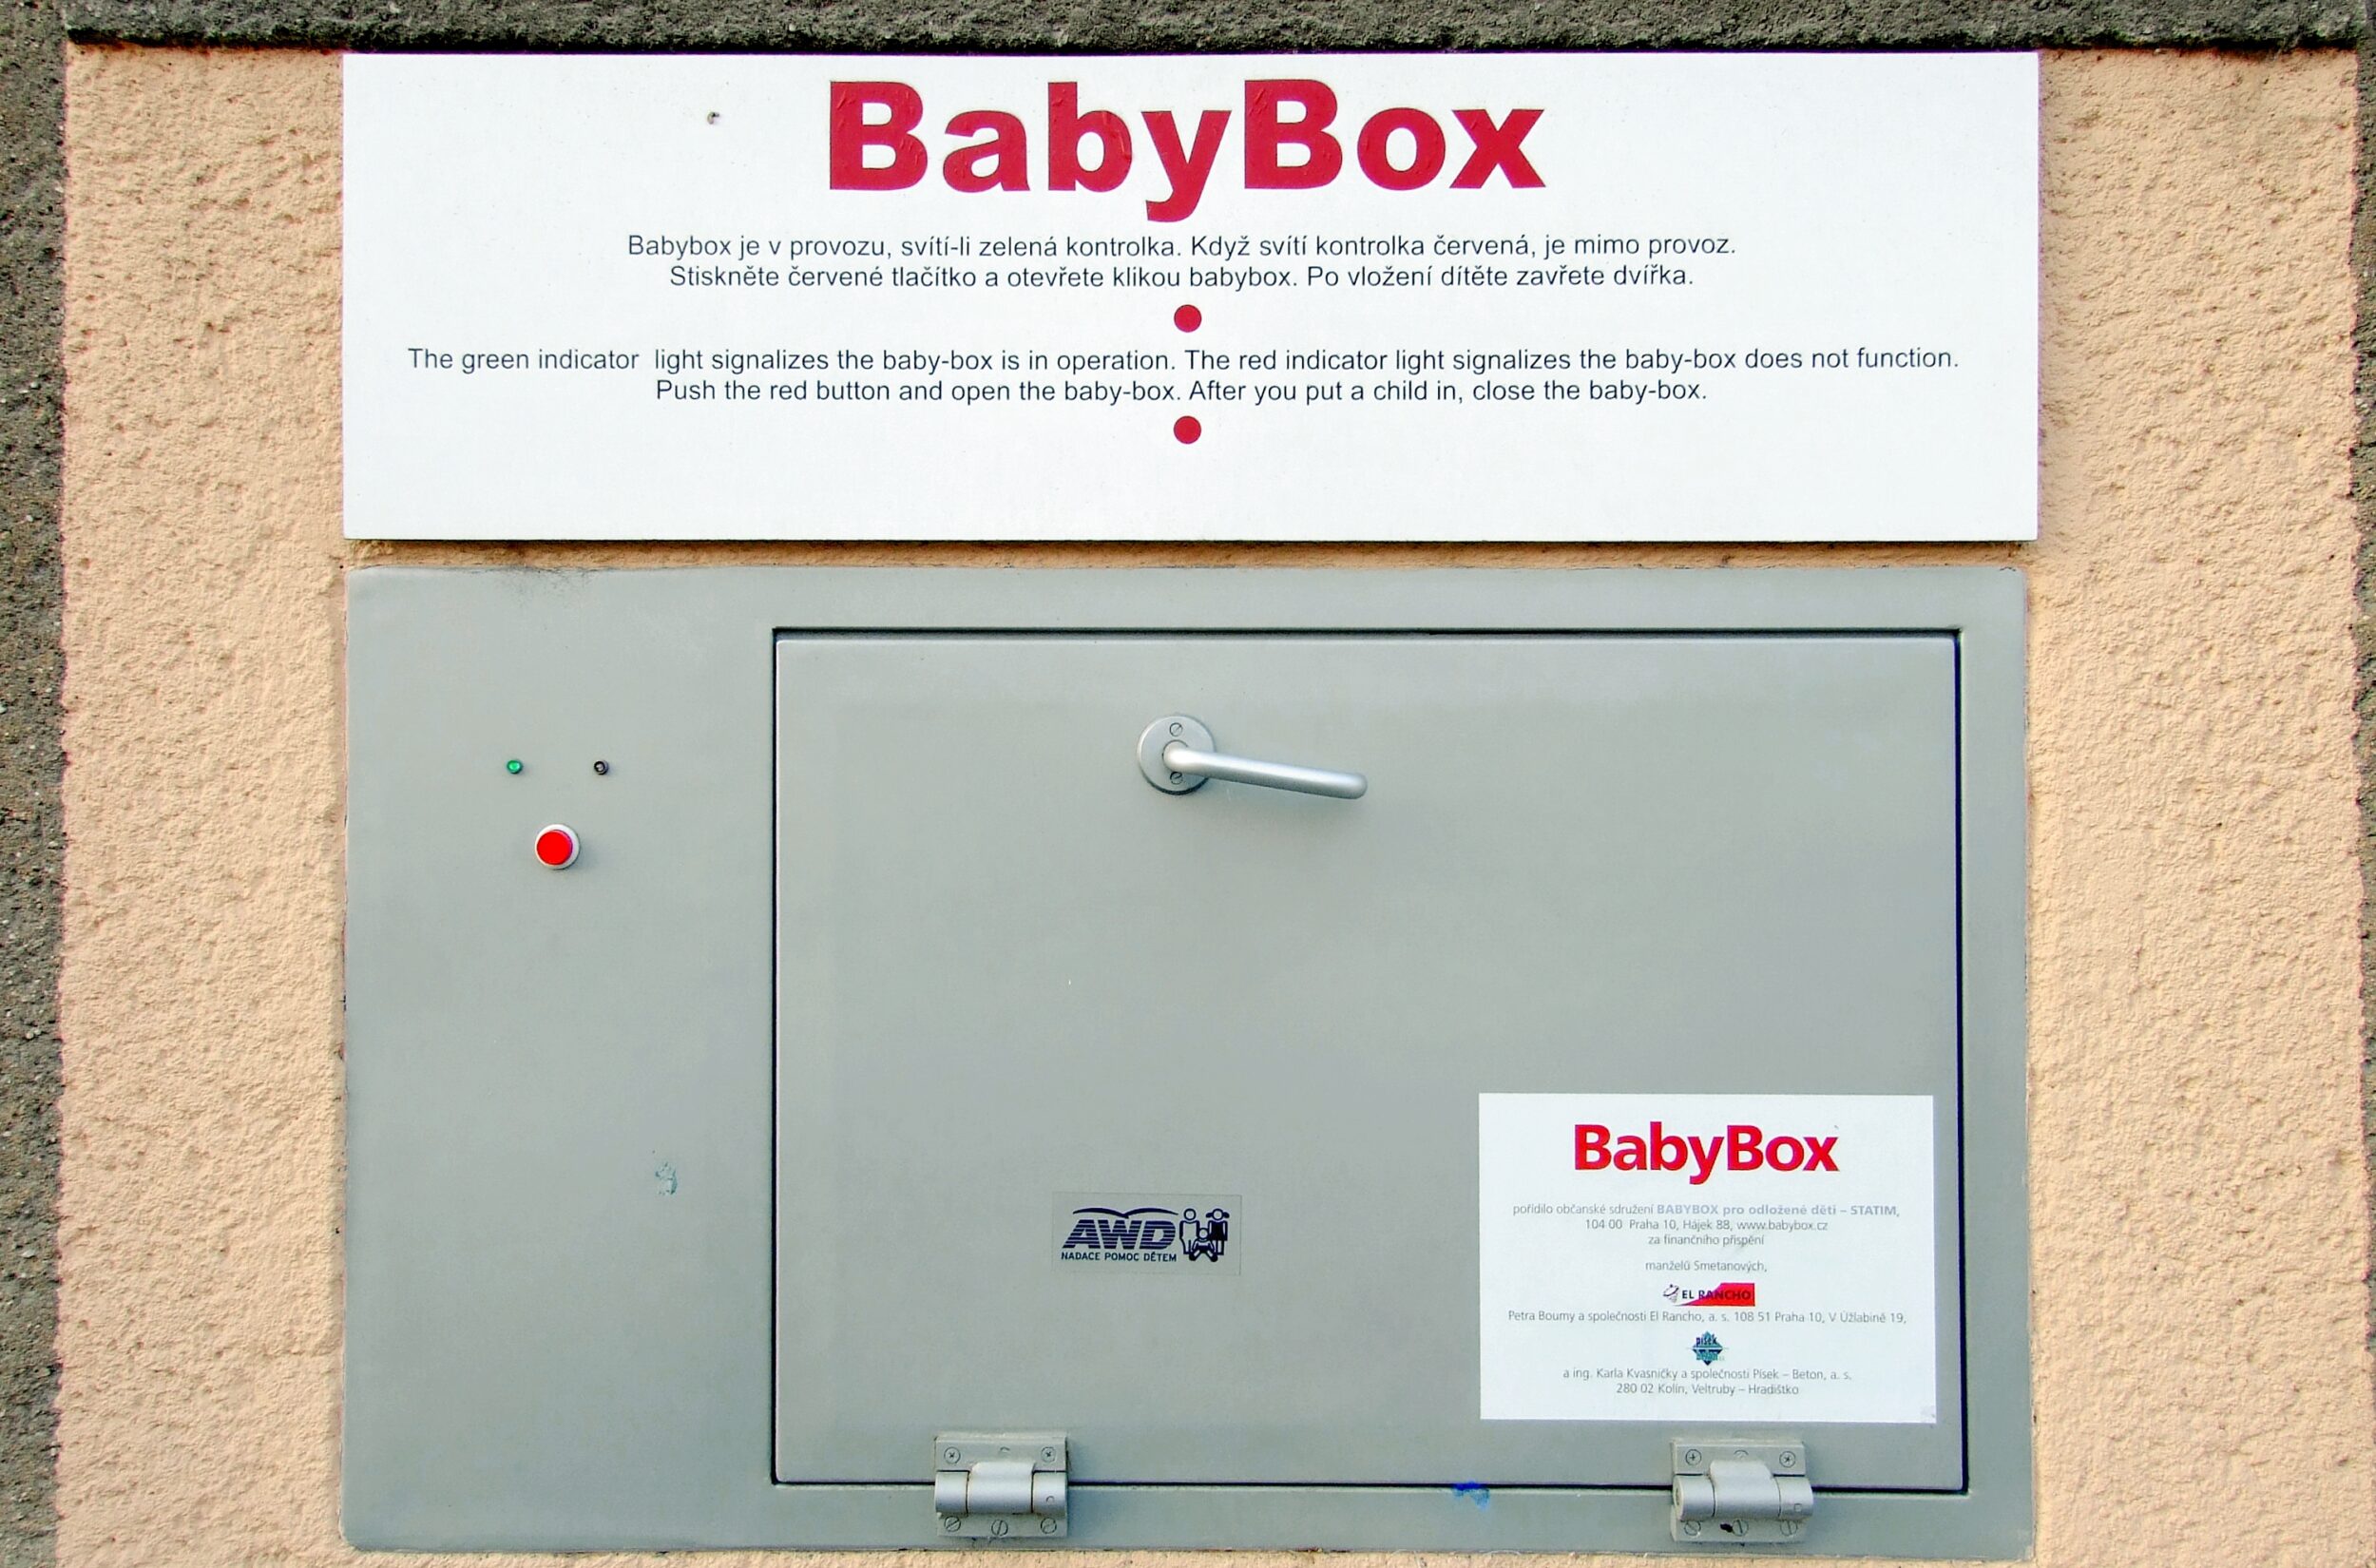 Baby hatch called "BabyBox" in the Czech Republic. The box is attached to a wall and looks similar to a safe. It gives instructions in both English and Czech. 